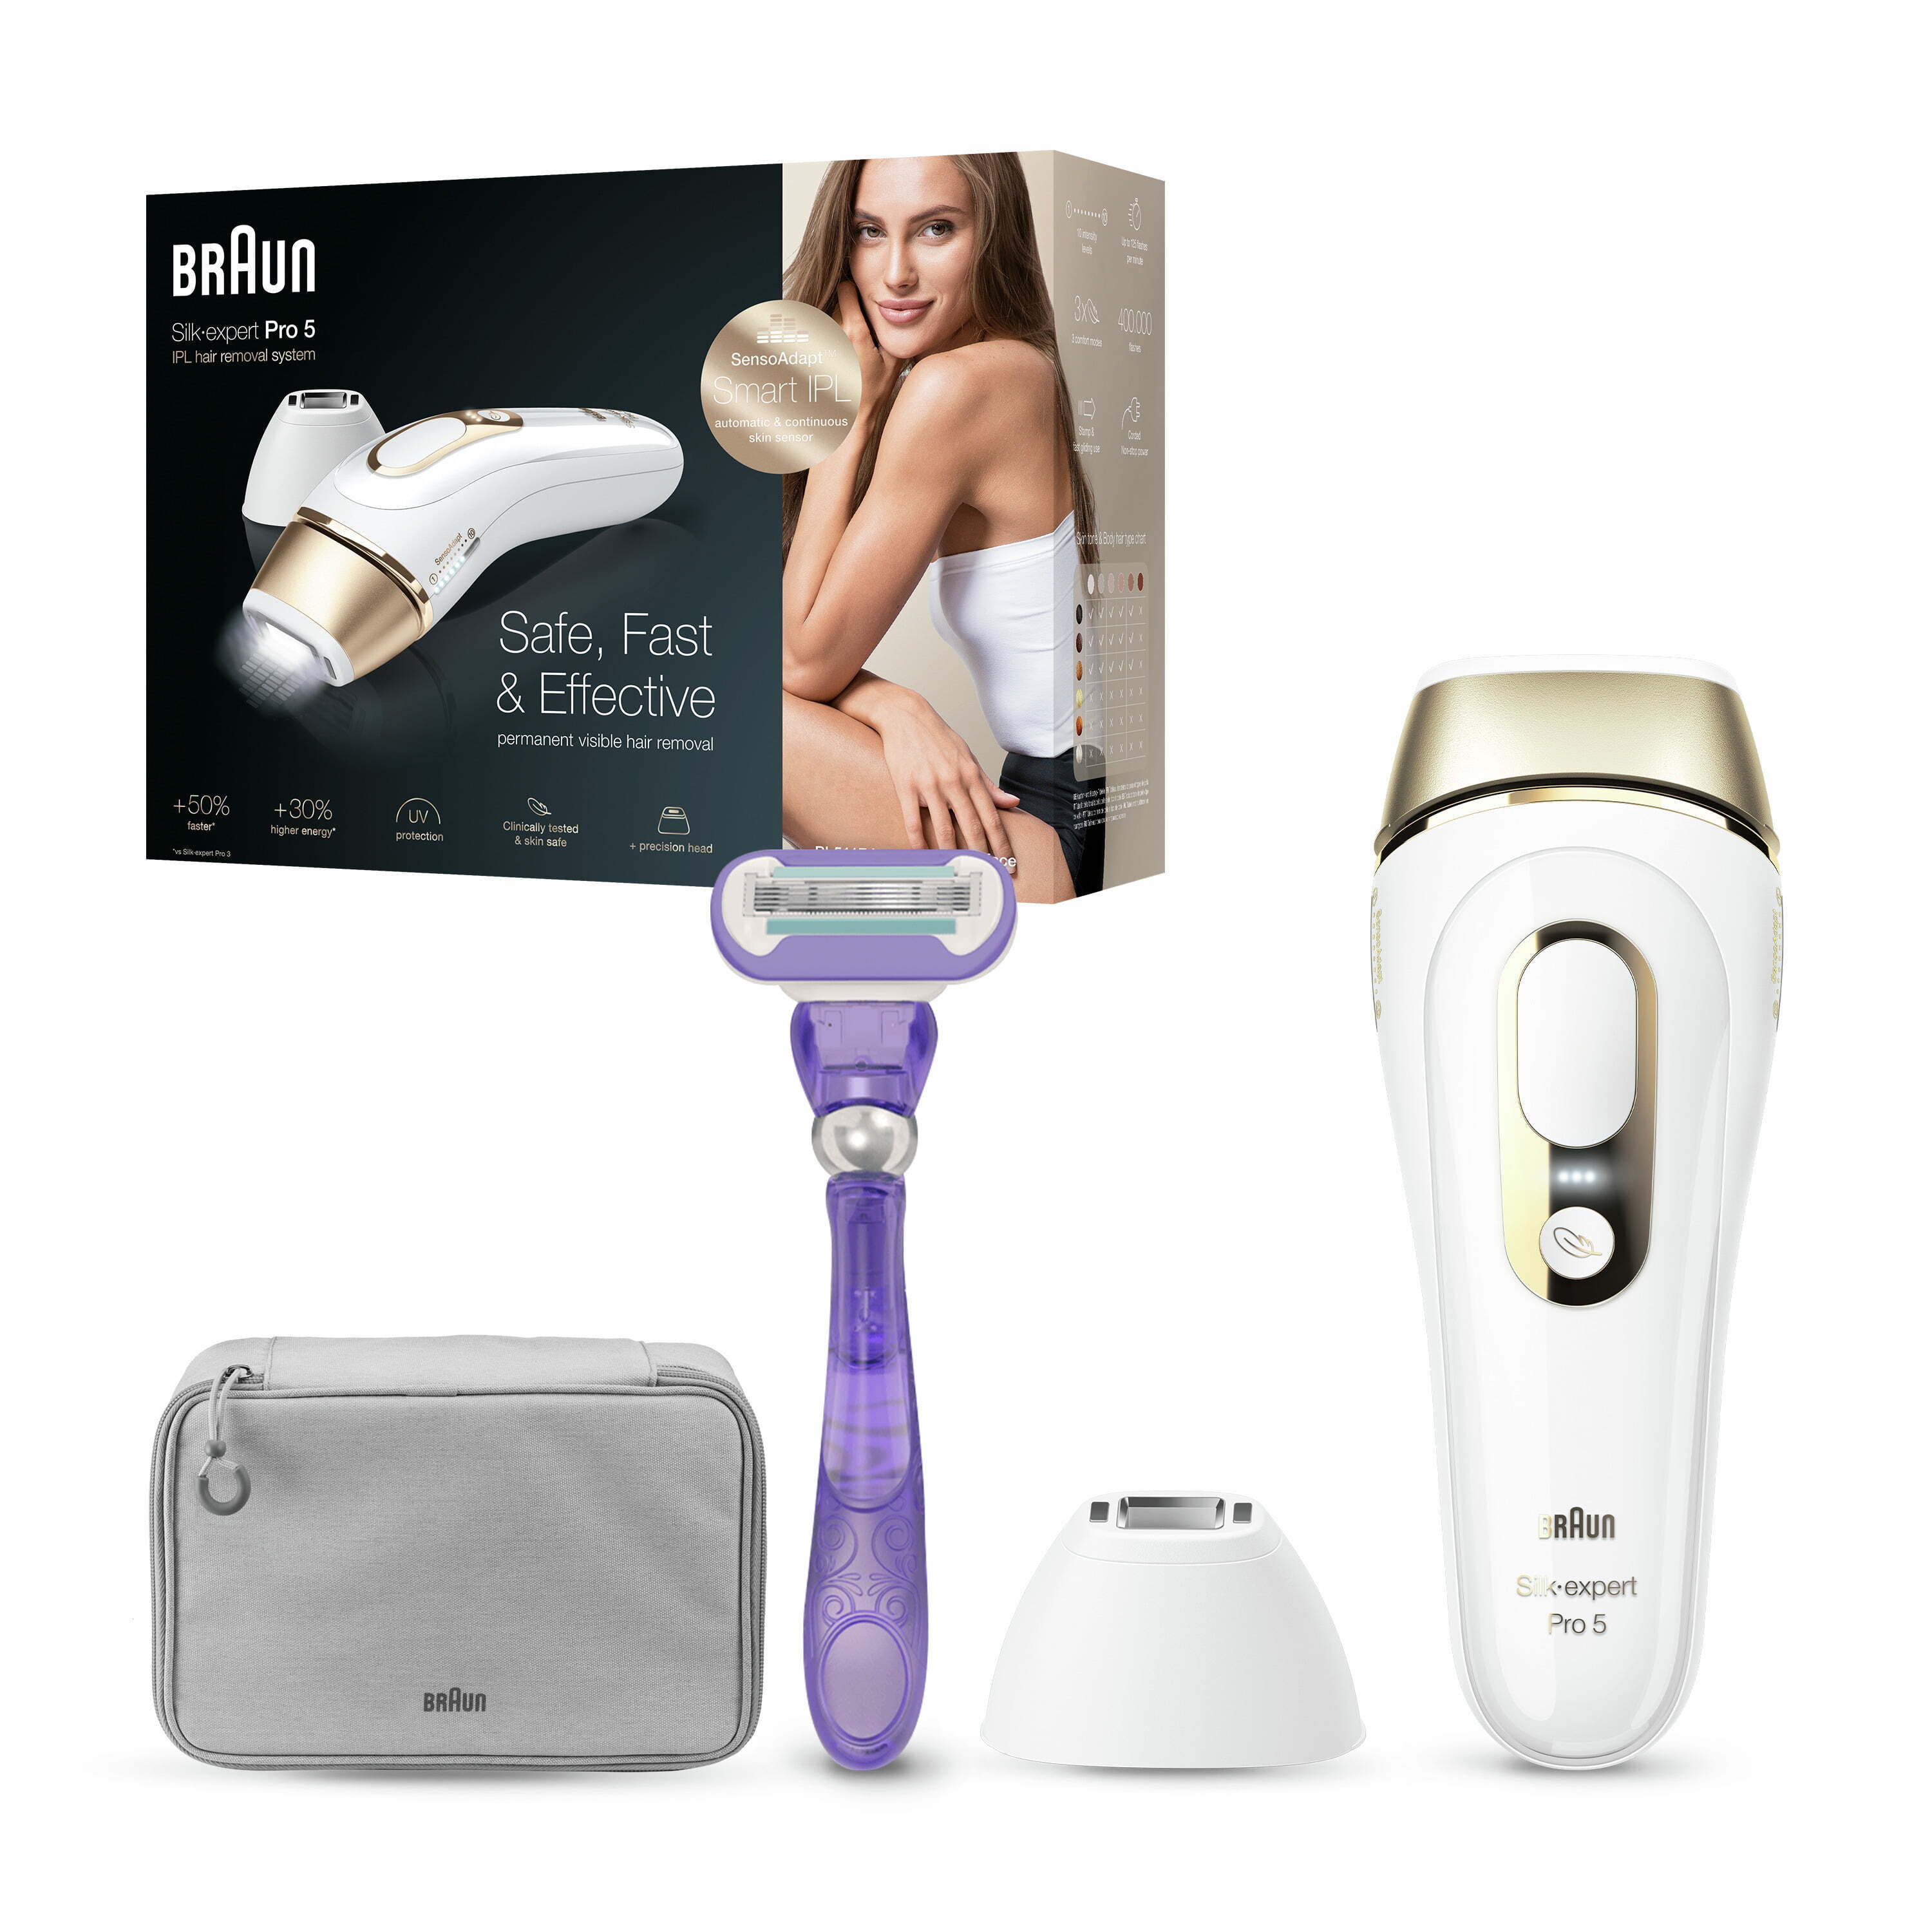 Braun Silk Expert IPL Laser Hair Removal at Home (Demonstration + Review) 